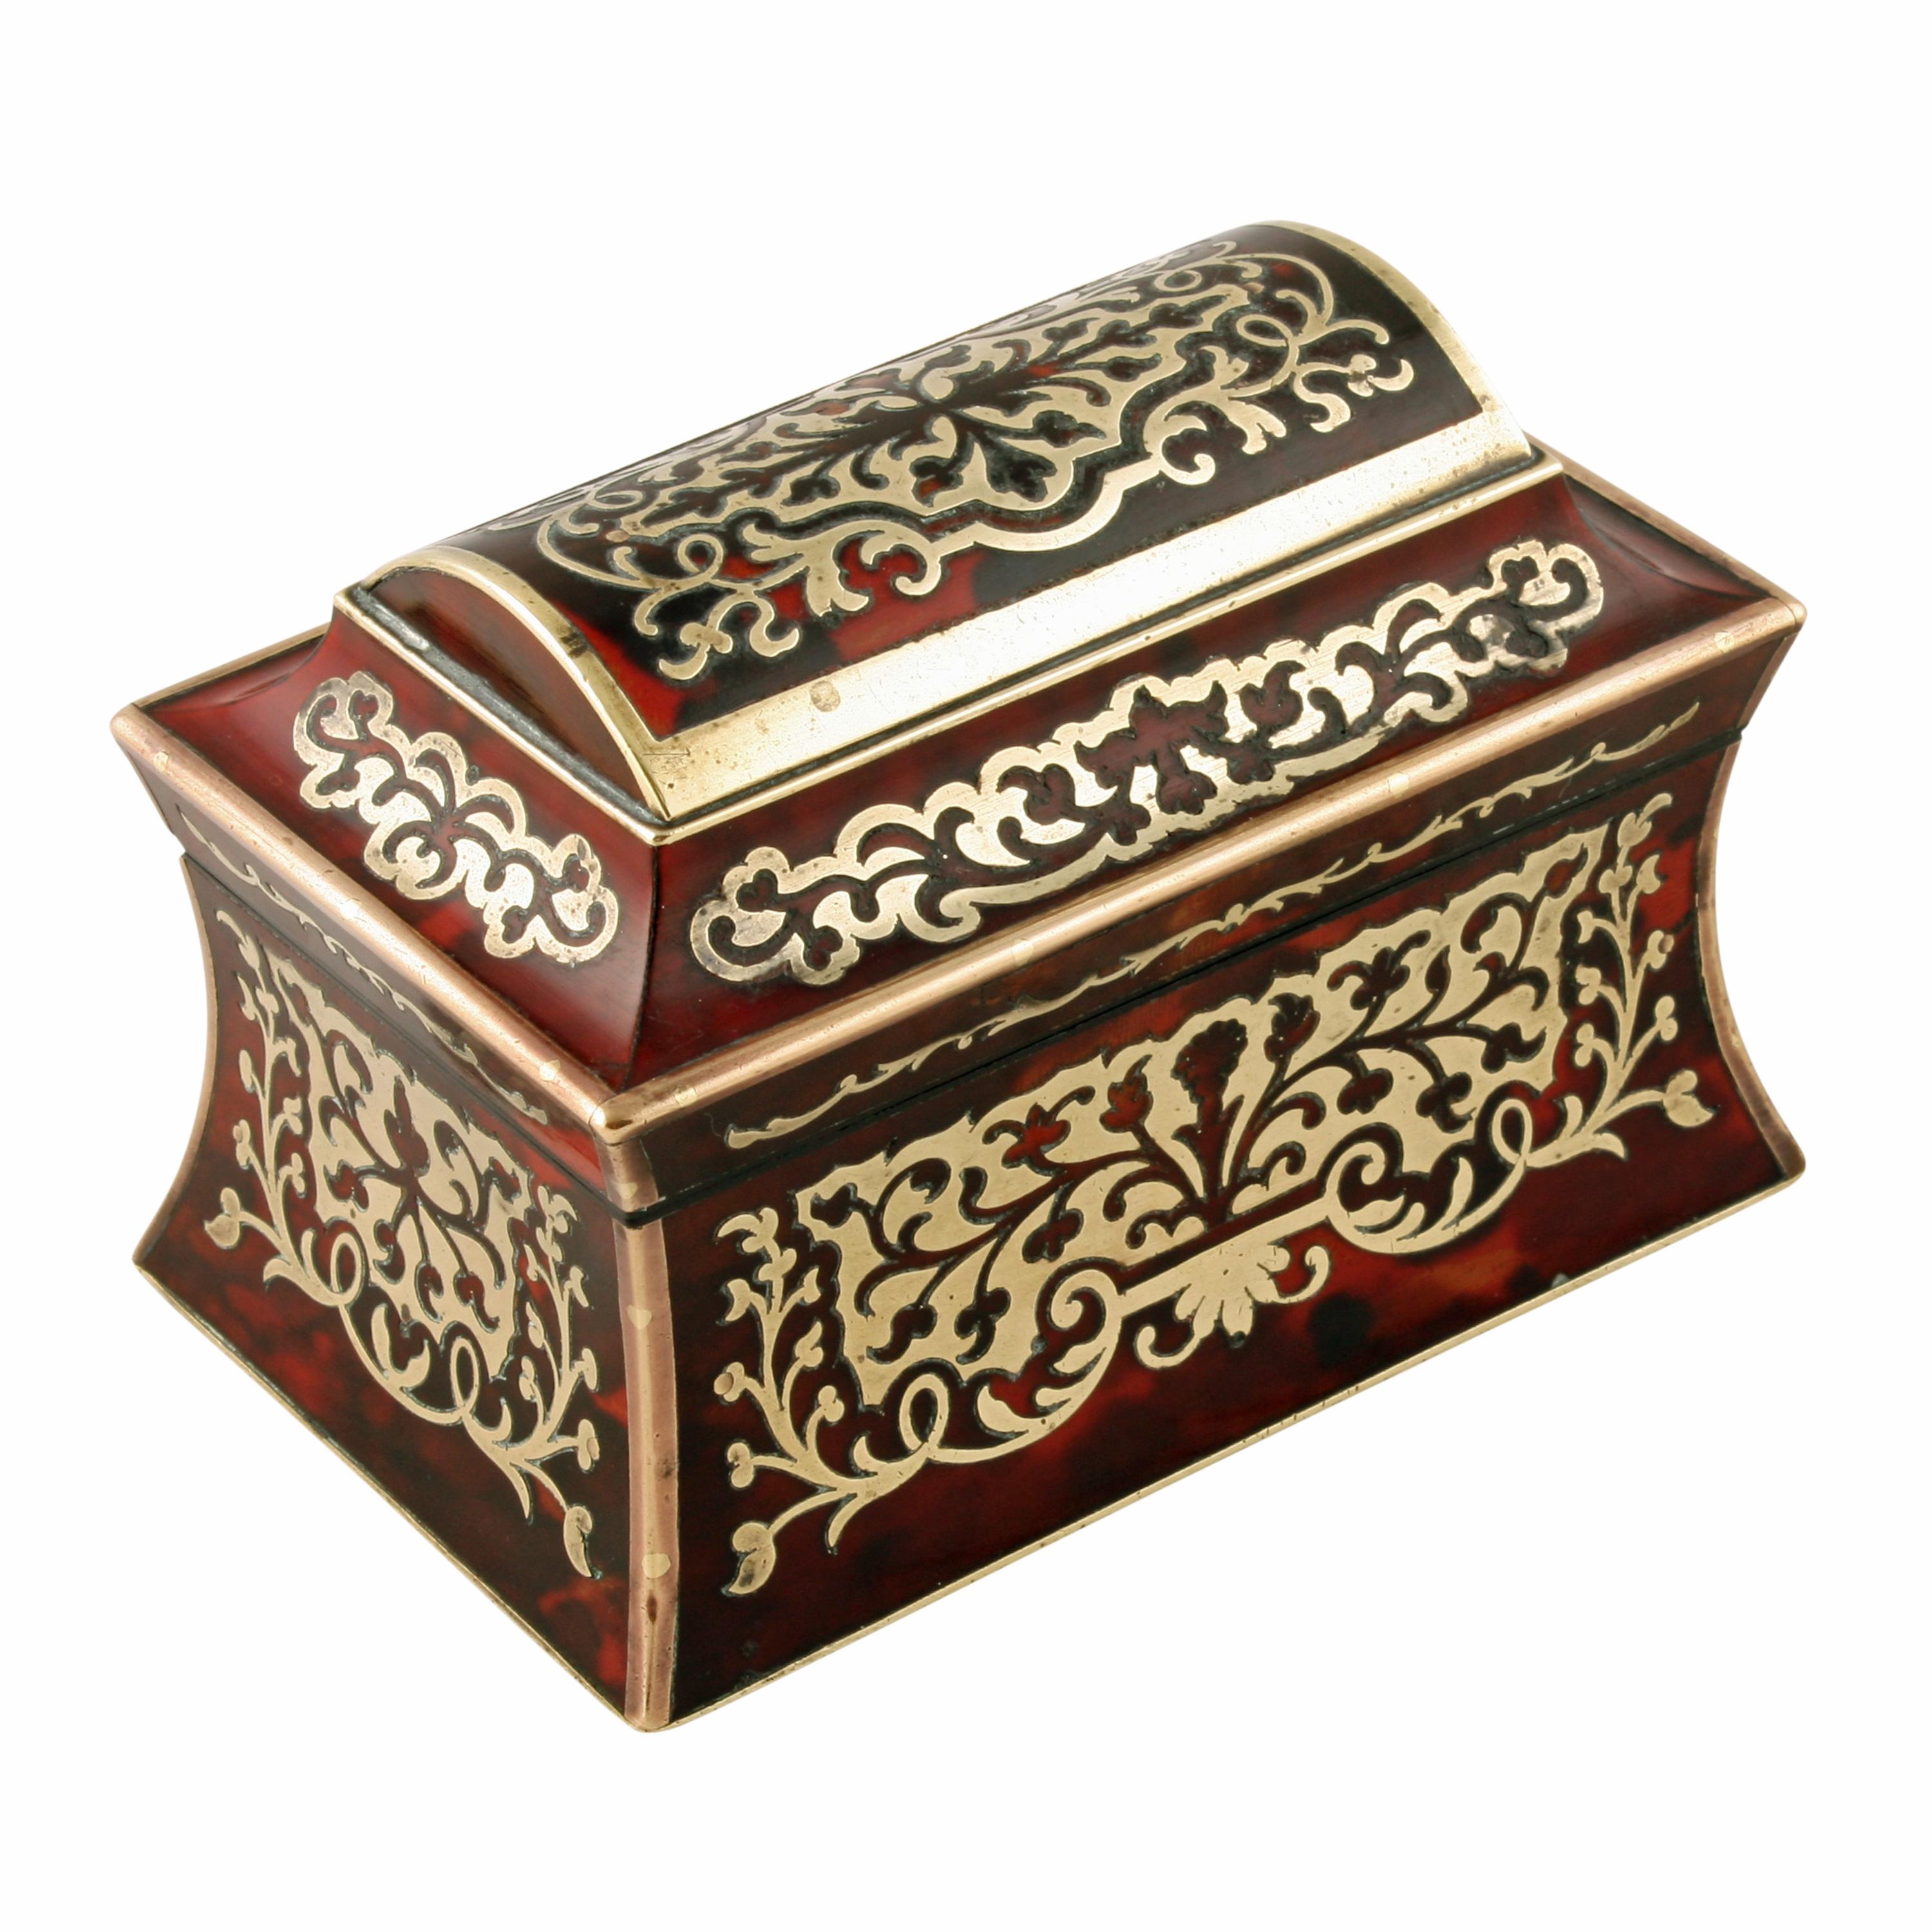 A 19th century miniature boulle work box in the shape of a sarcophagus tea caddy.

The wood box is beautifully decorated with boulle work (heavy brass inlaid into tortoise shell) with brass rims and base.

The hinged lid opens to a small storage